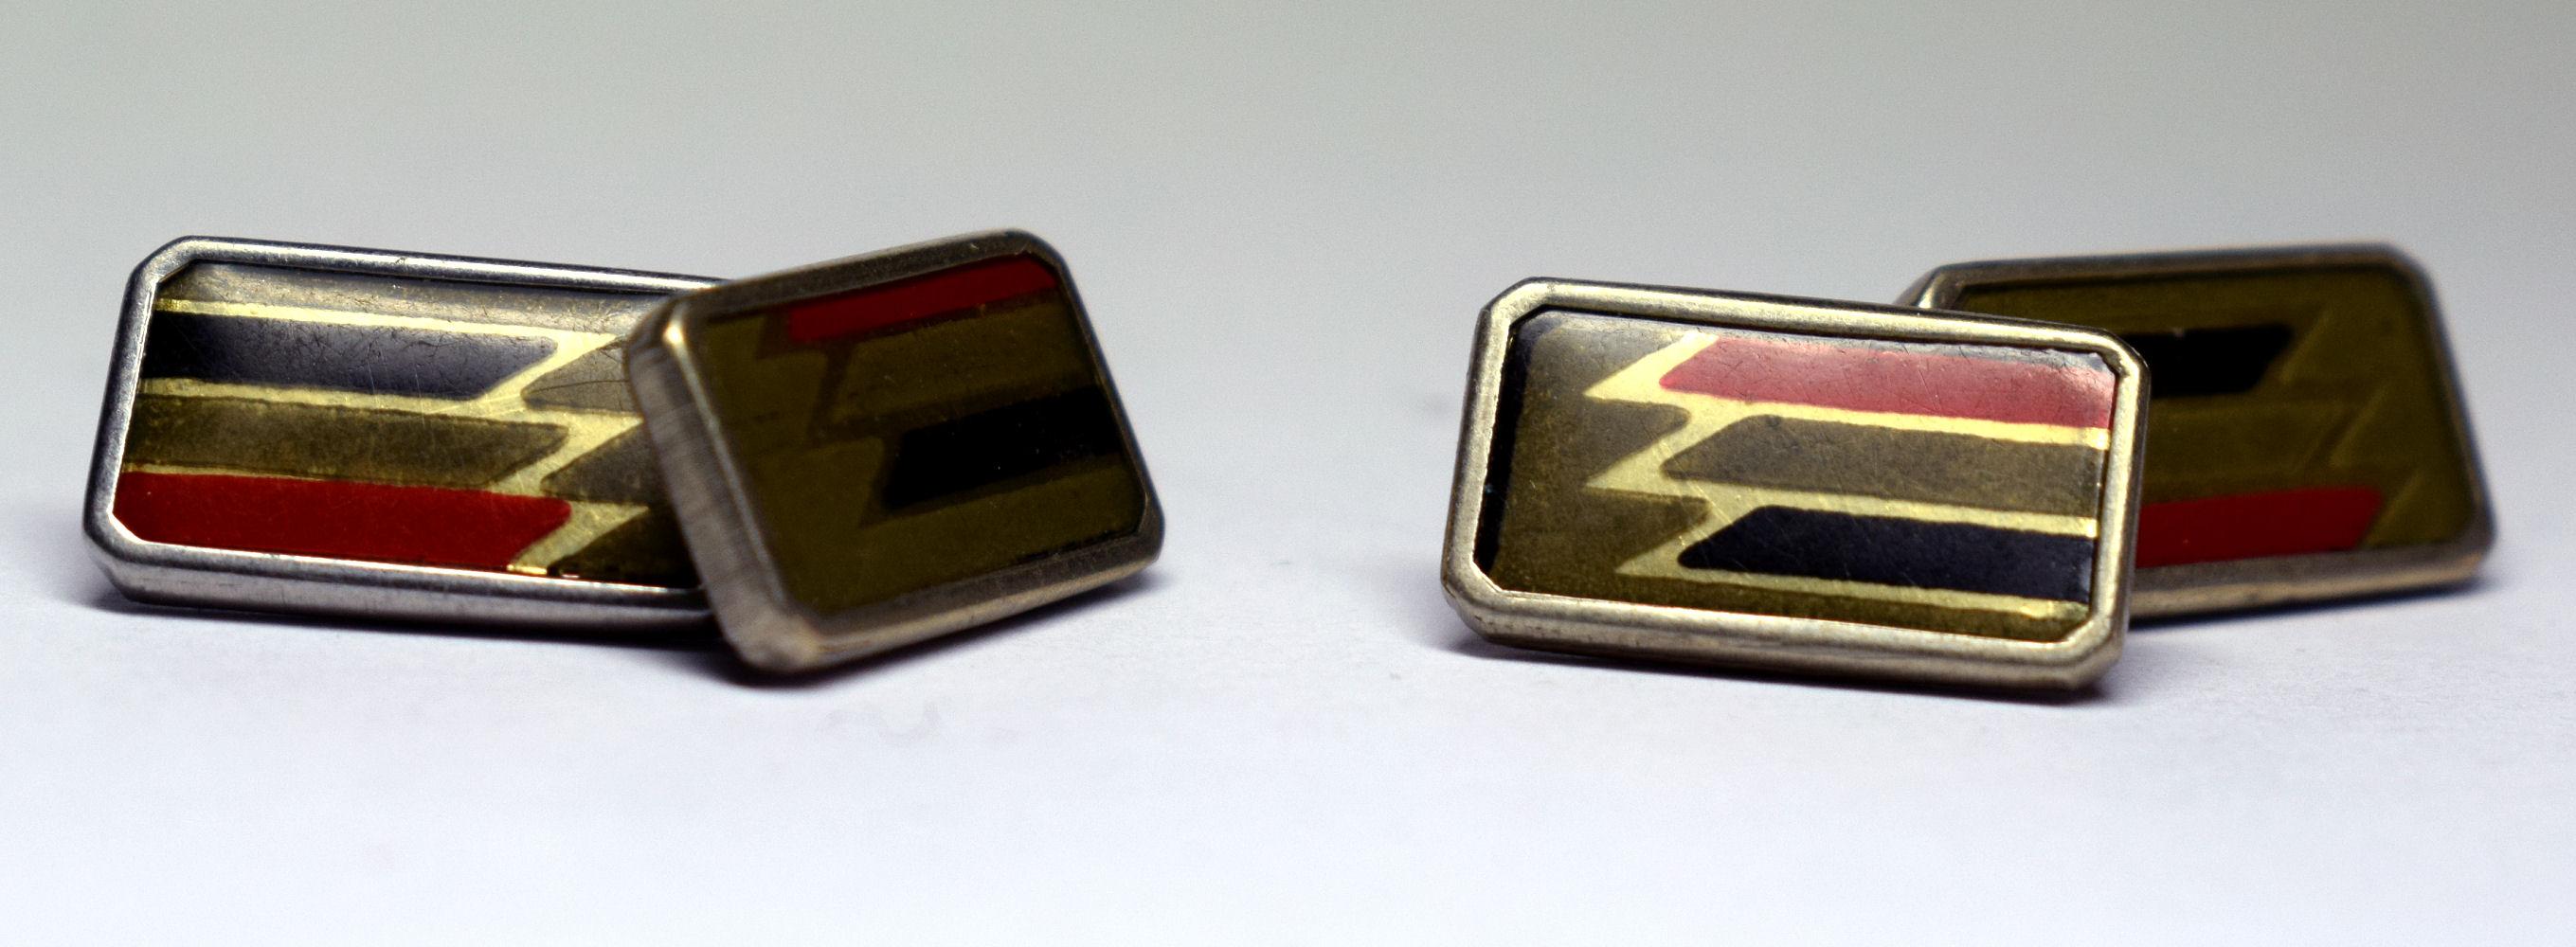 French Art Deco Men’s Enamel Cufflinks with Matching Buckle In Good Condition For Sale In Devon, England